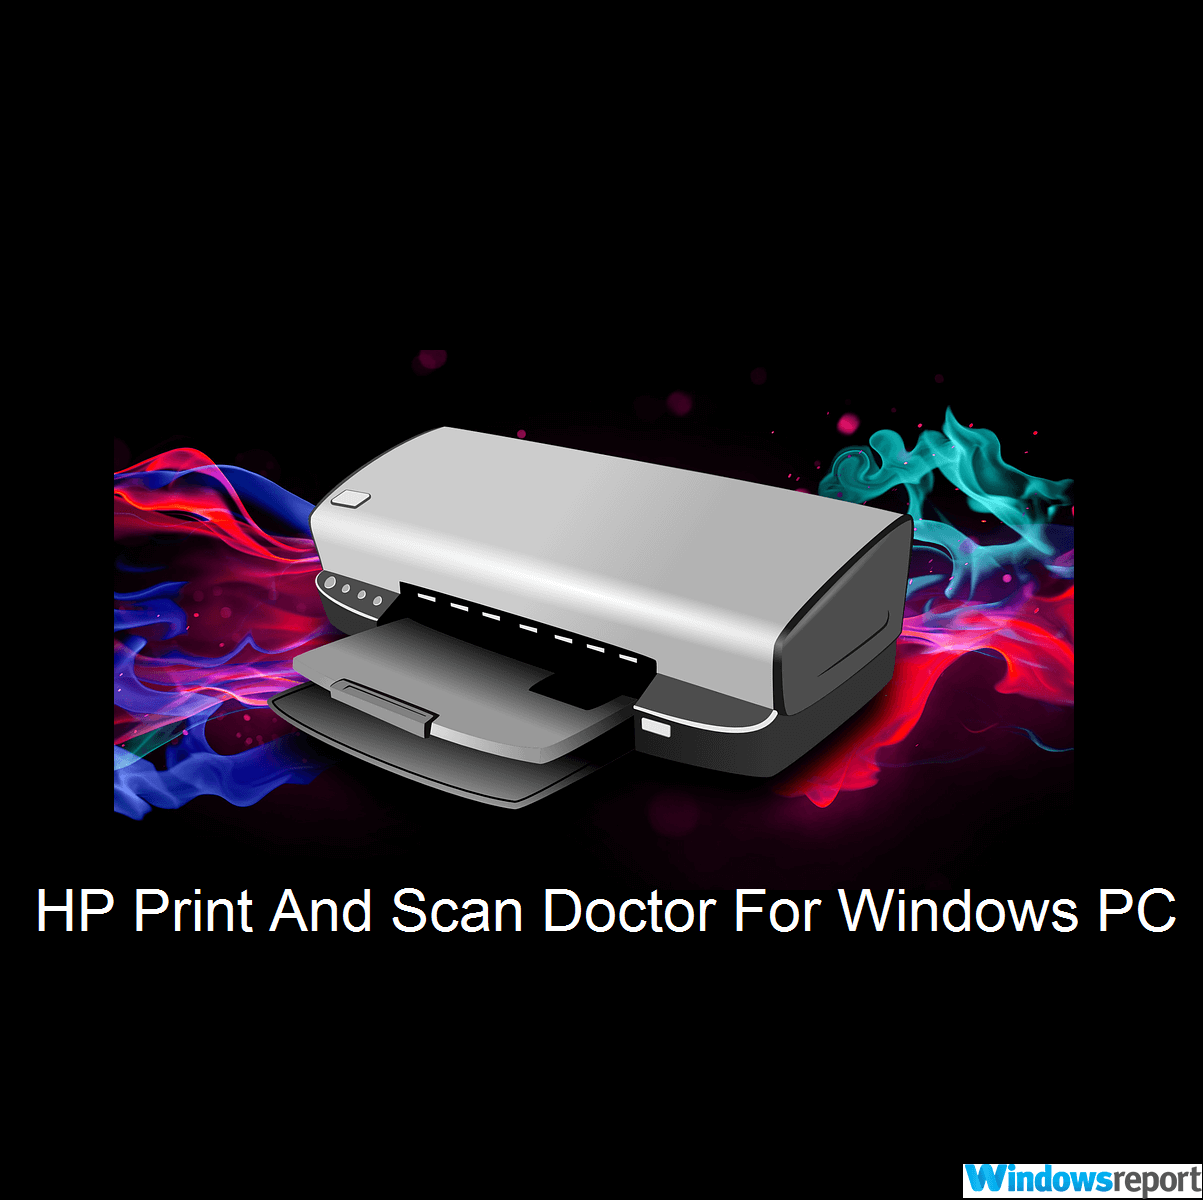 download the new for windows HP Print and Scan Doctor 5.7.4.5